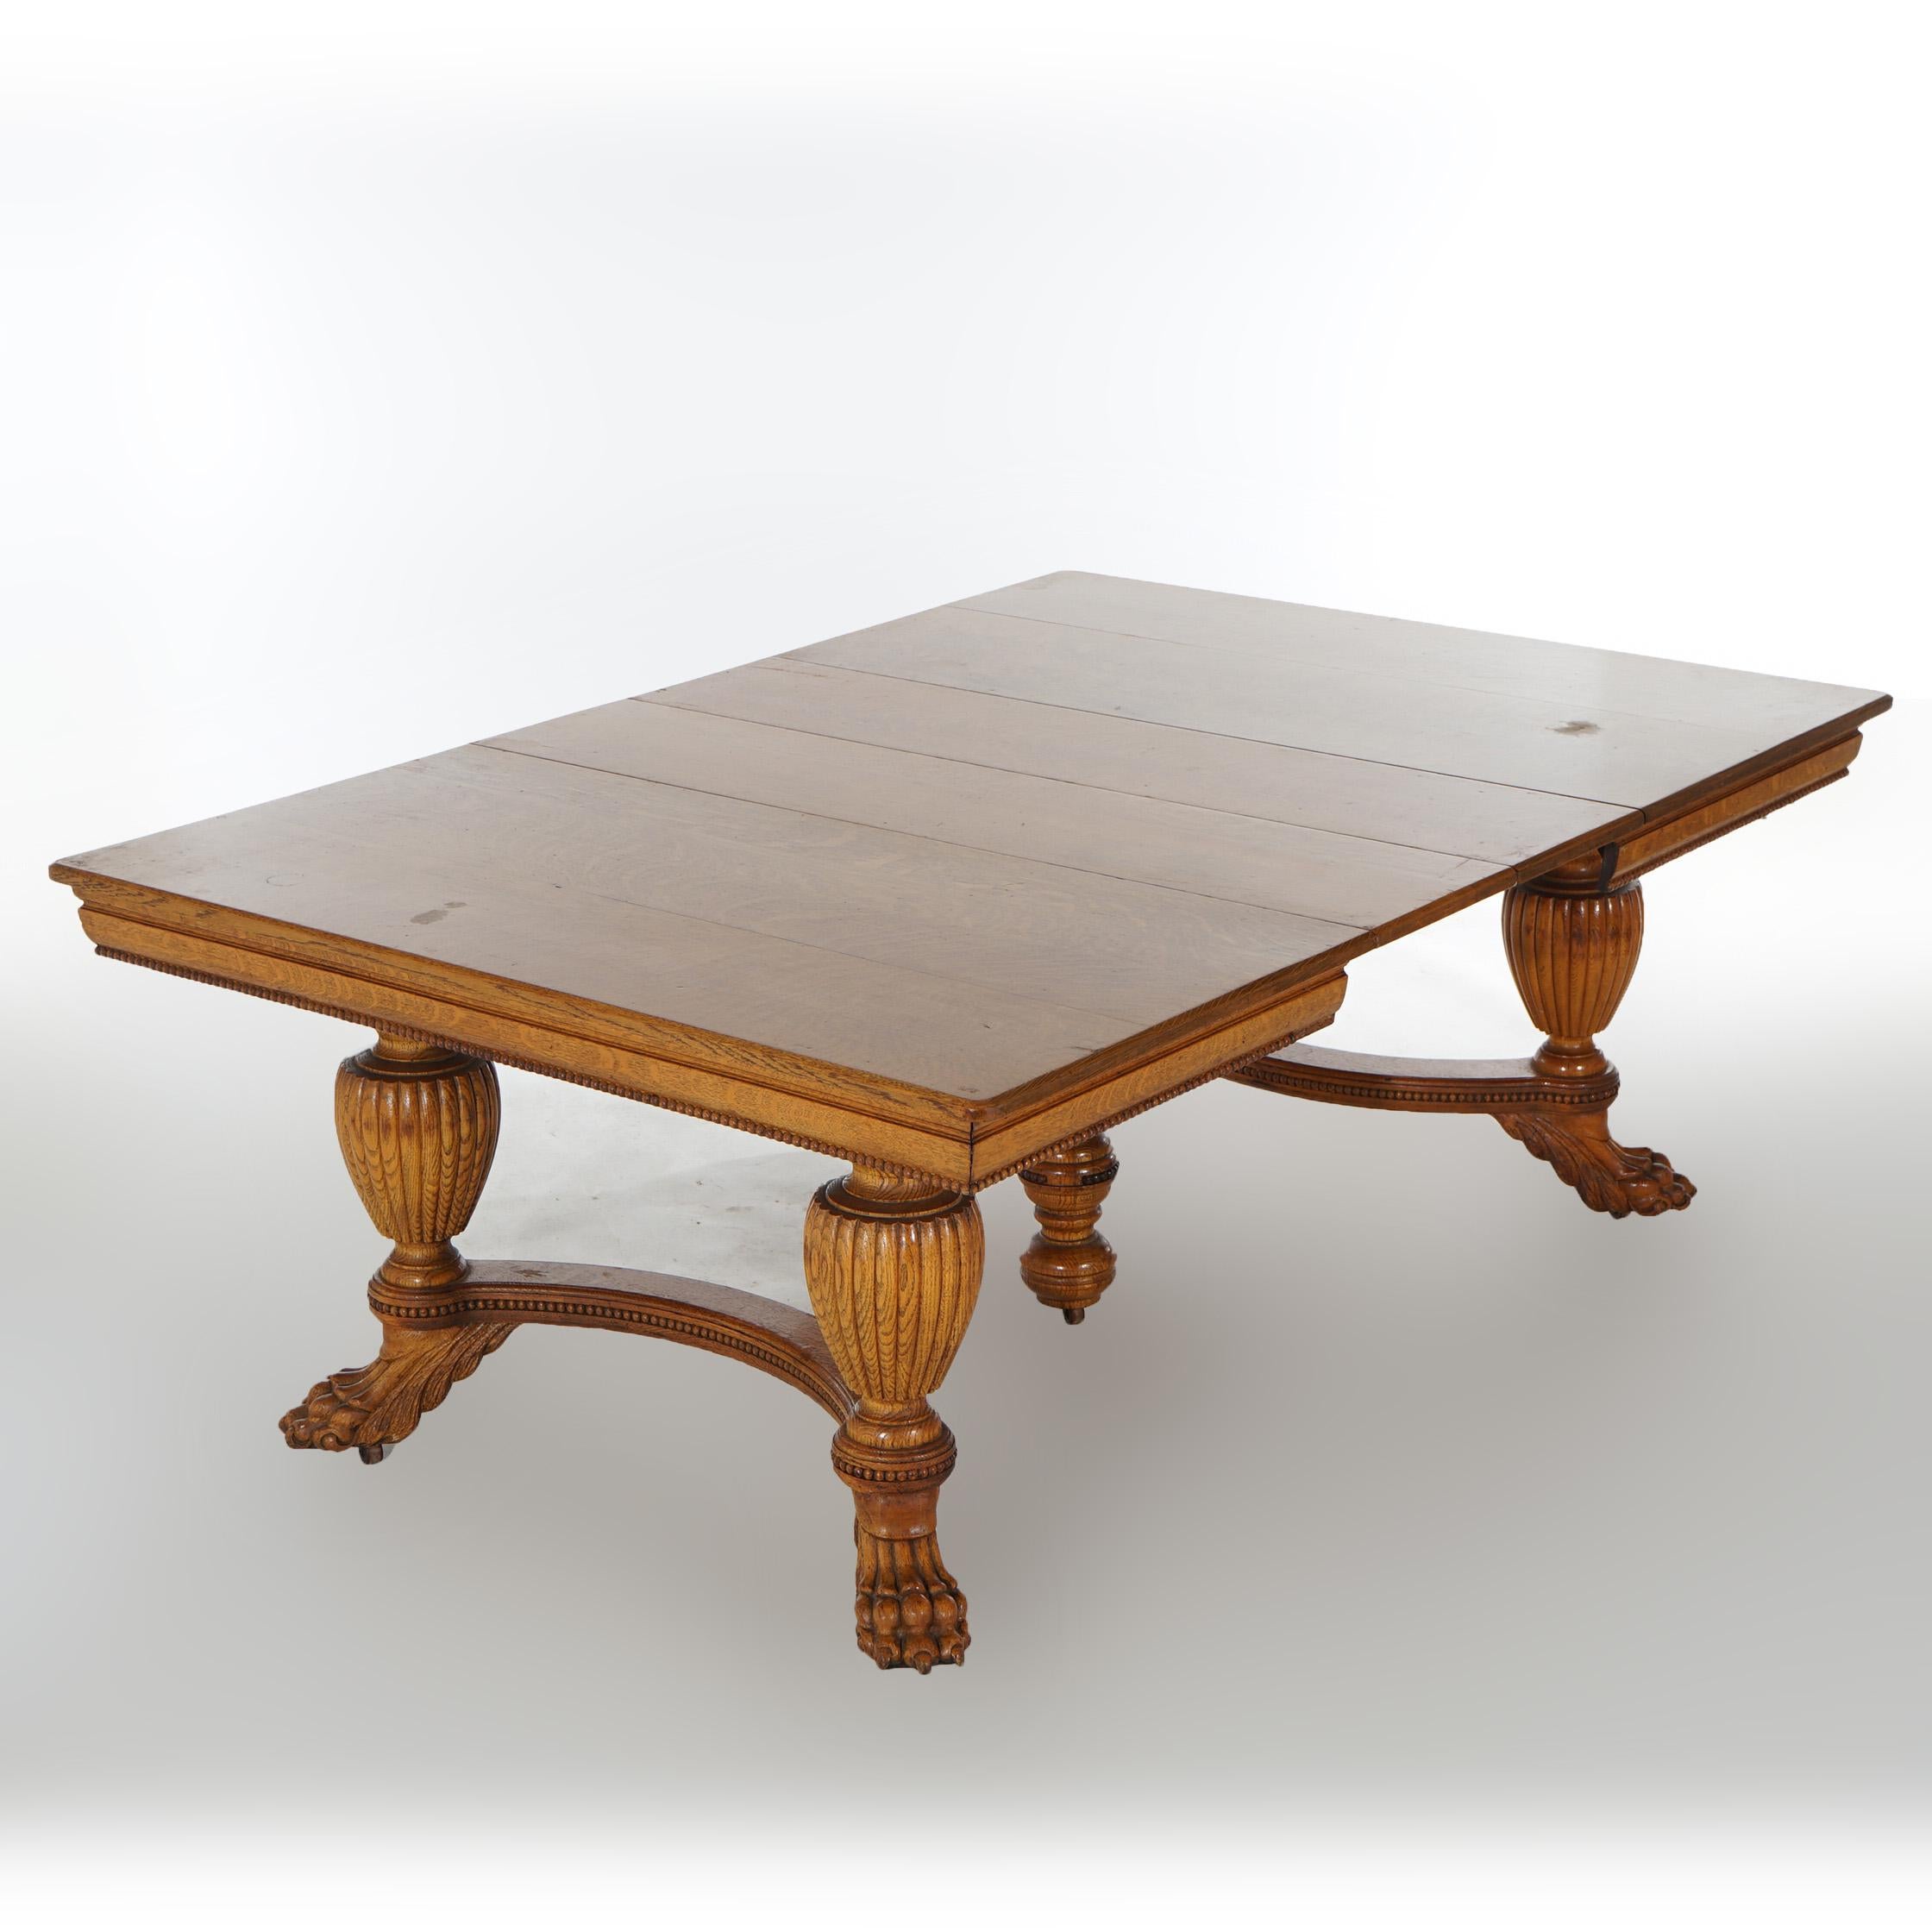 An antique square extension dining room table offers quarter sawn oak construction raised on urn form legs termination in oversized carved claw feet; includes two 11